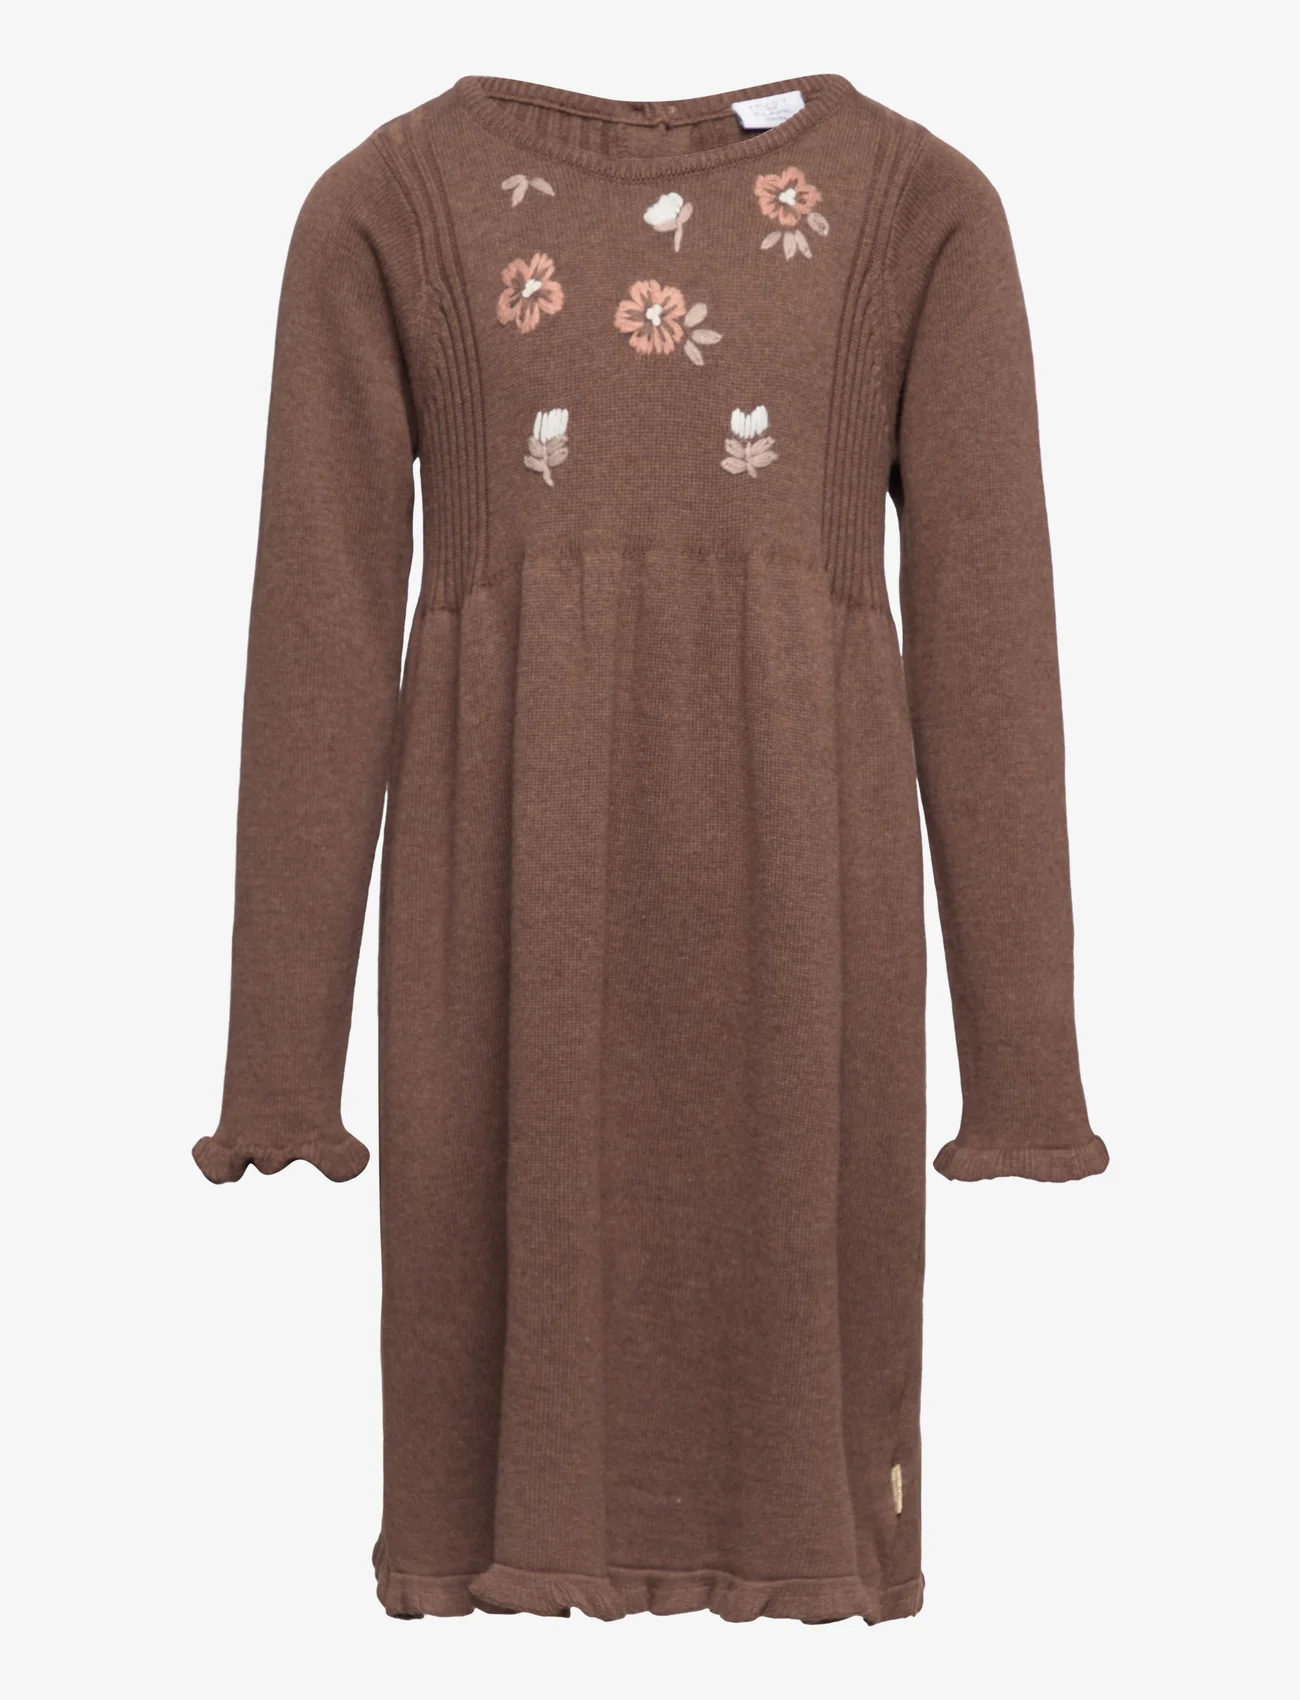 Hust & Claire - Daisi - Dress - long-sleeved casual dresses - toffee melange - 0